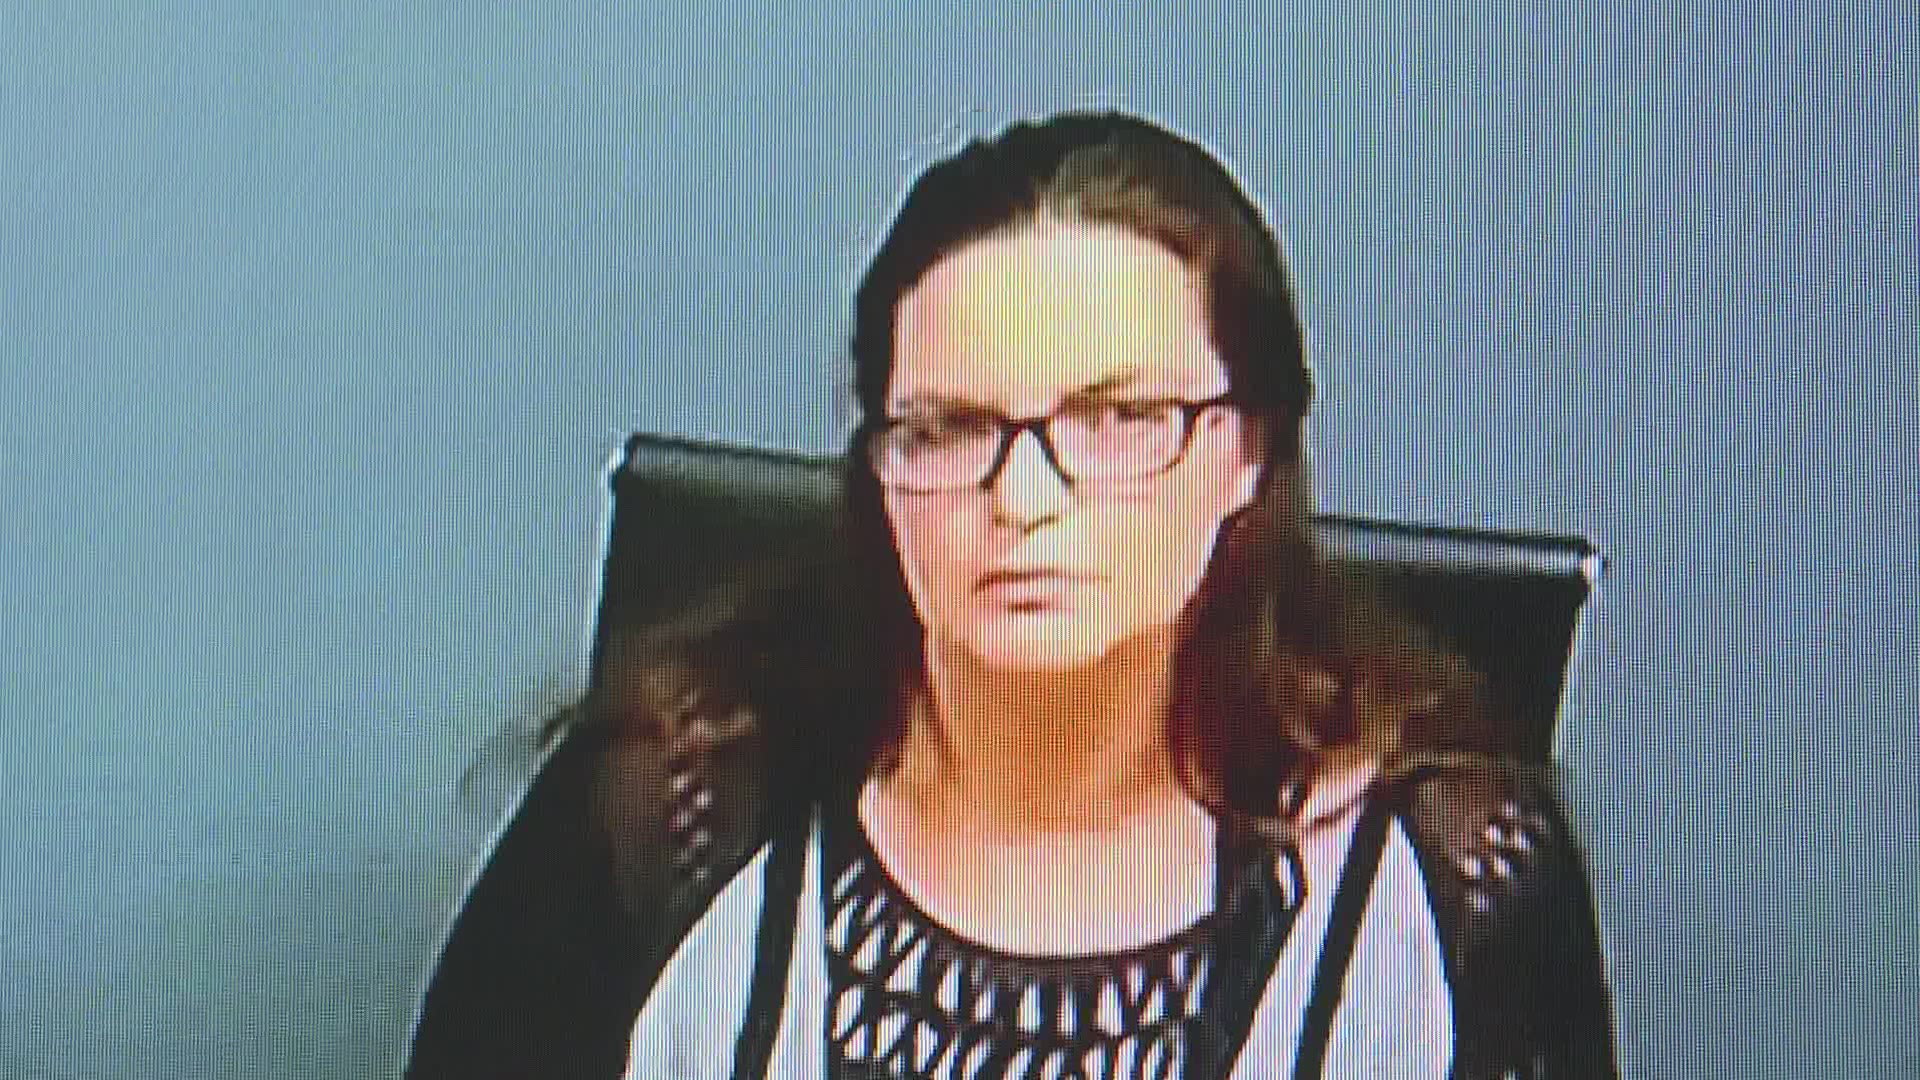 Kathryn Merritt faces a 10-year felony for embezzlement from Cedar Springs Junior Ball League; cash withdrawals, purchases at hotels uncovered during probe.